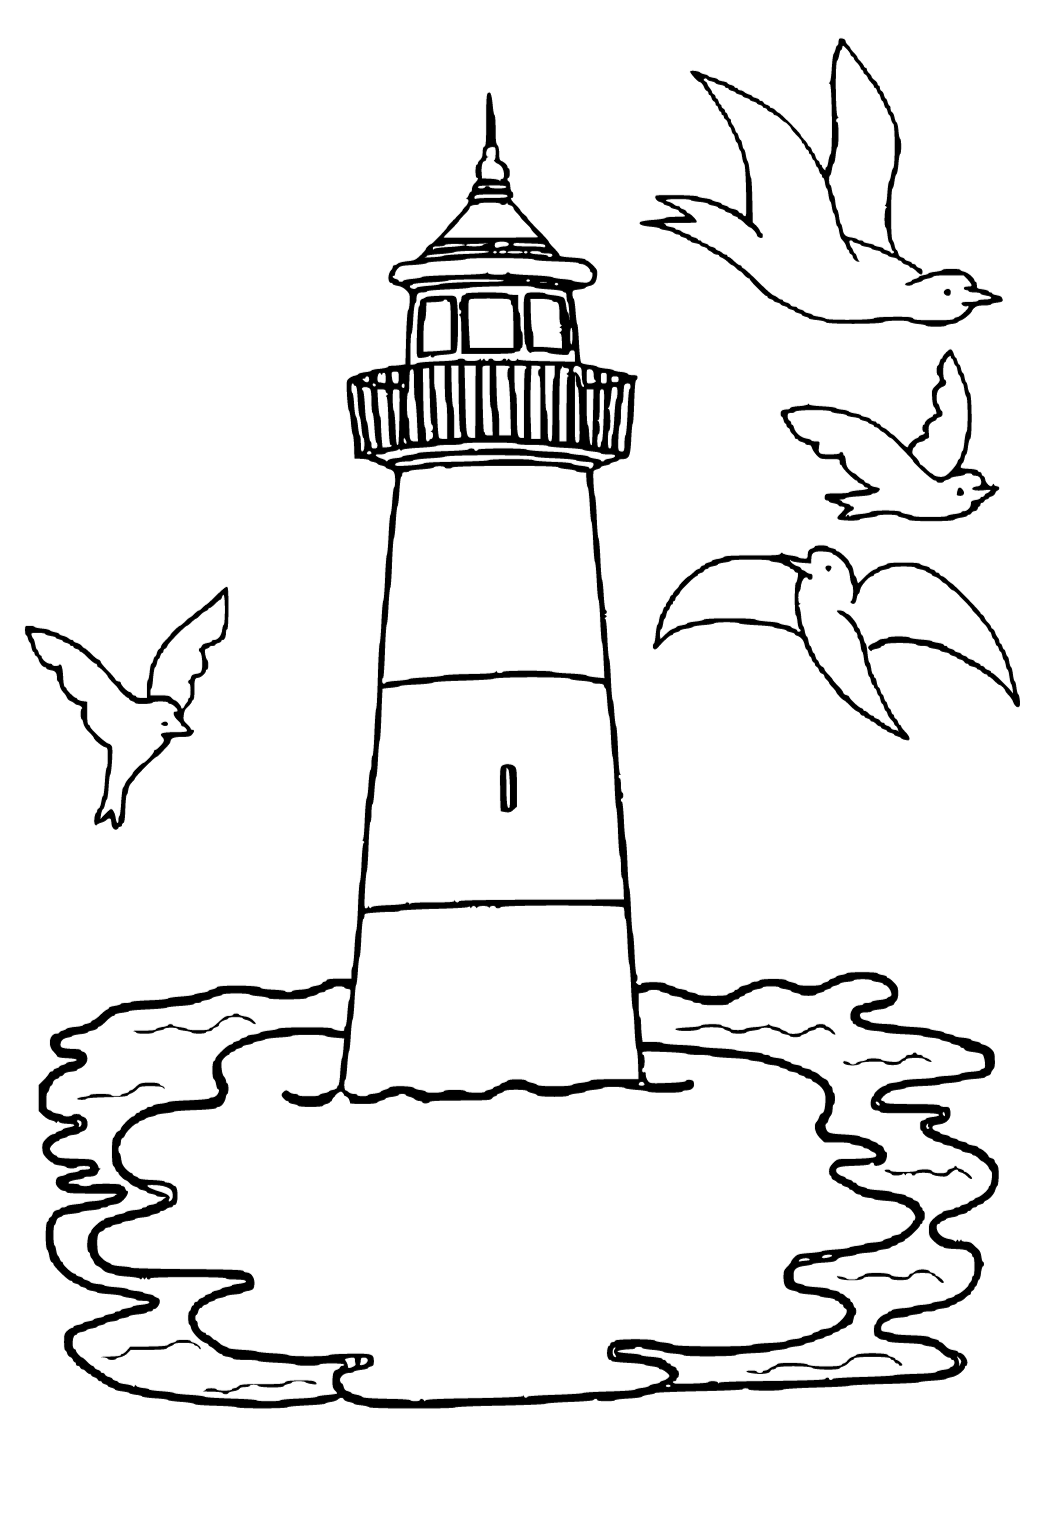 Free printable lighthouse seagulls coloring page for adults and kids